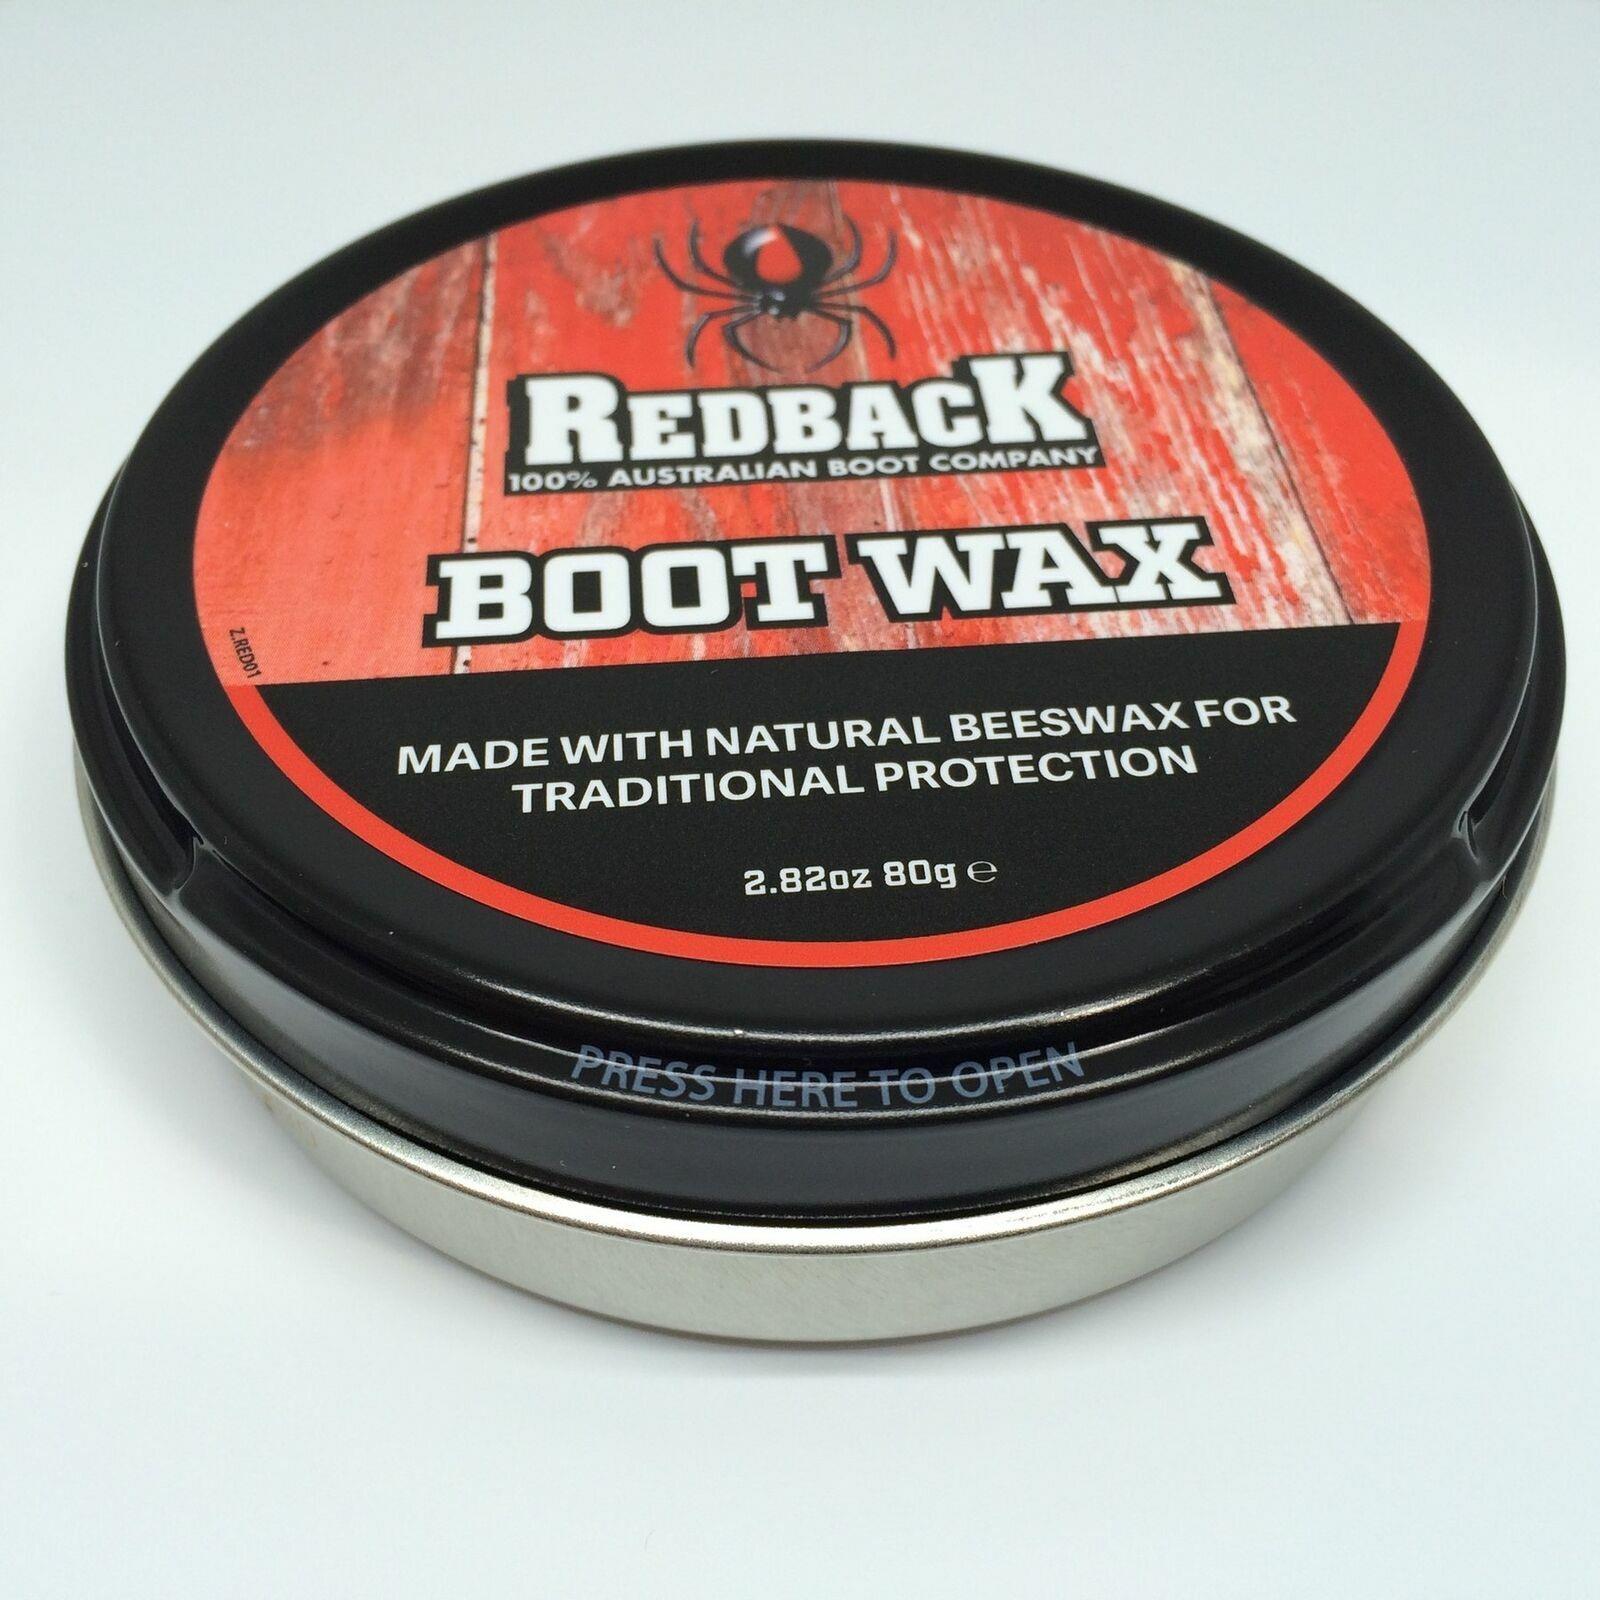 REDBACK UWAX beeswax waterproofing & leather conditioner - 80g tin